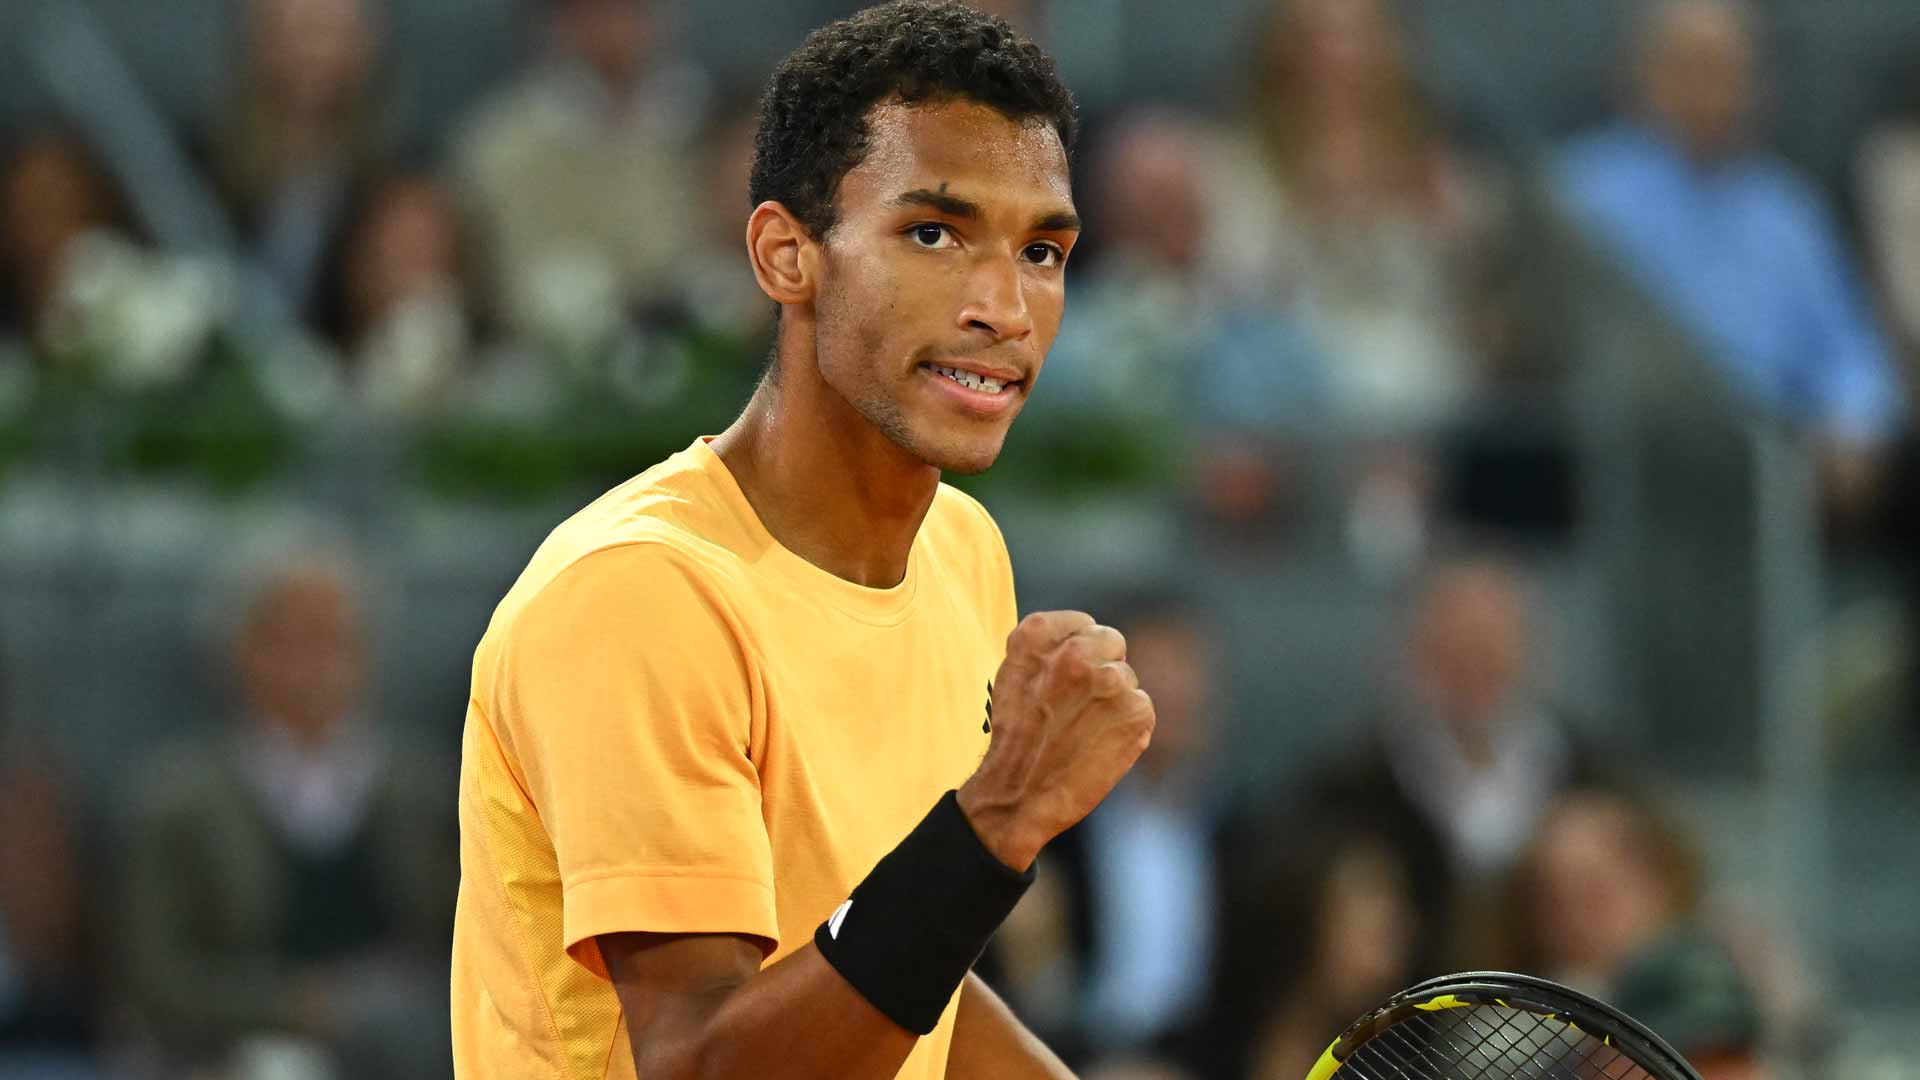 Felix Auger-Aliassime pushes Andrey Rublev to a third set, but falls short in his first ATP Masters 1000 final.